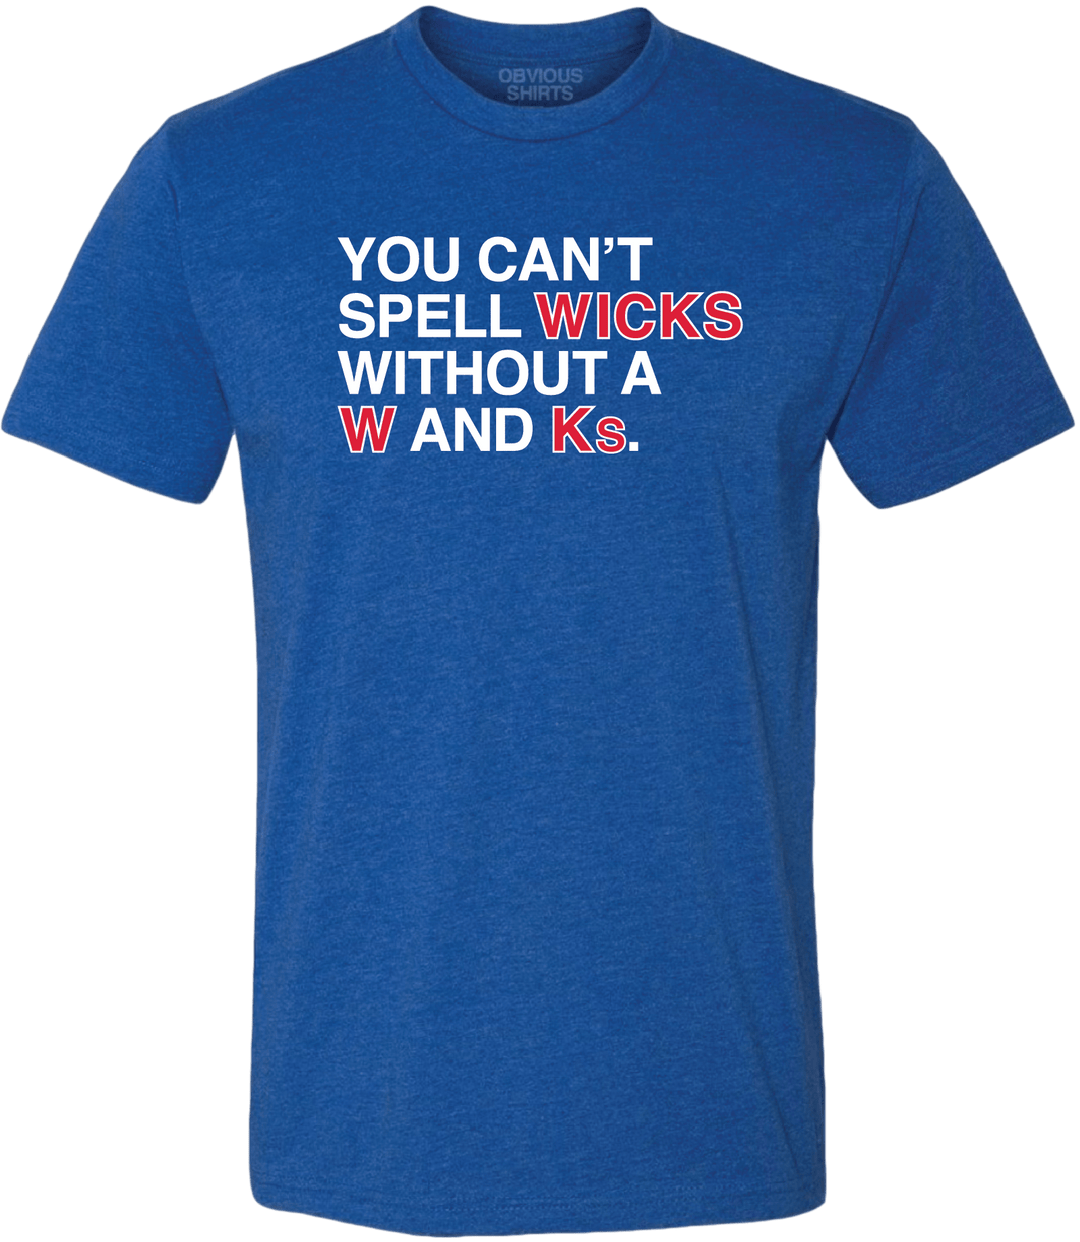 CAN'T SPELL WICKS WITHOUT A W AND Ks. - OBVIOUS SHIRTS